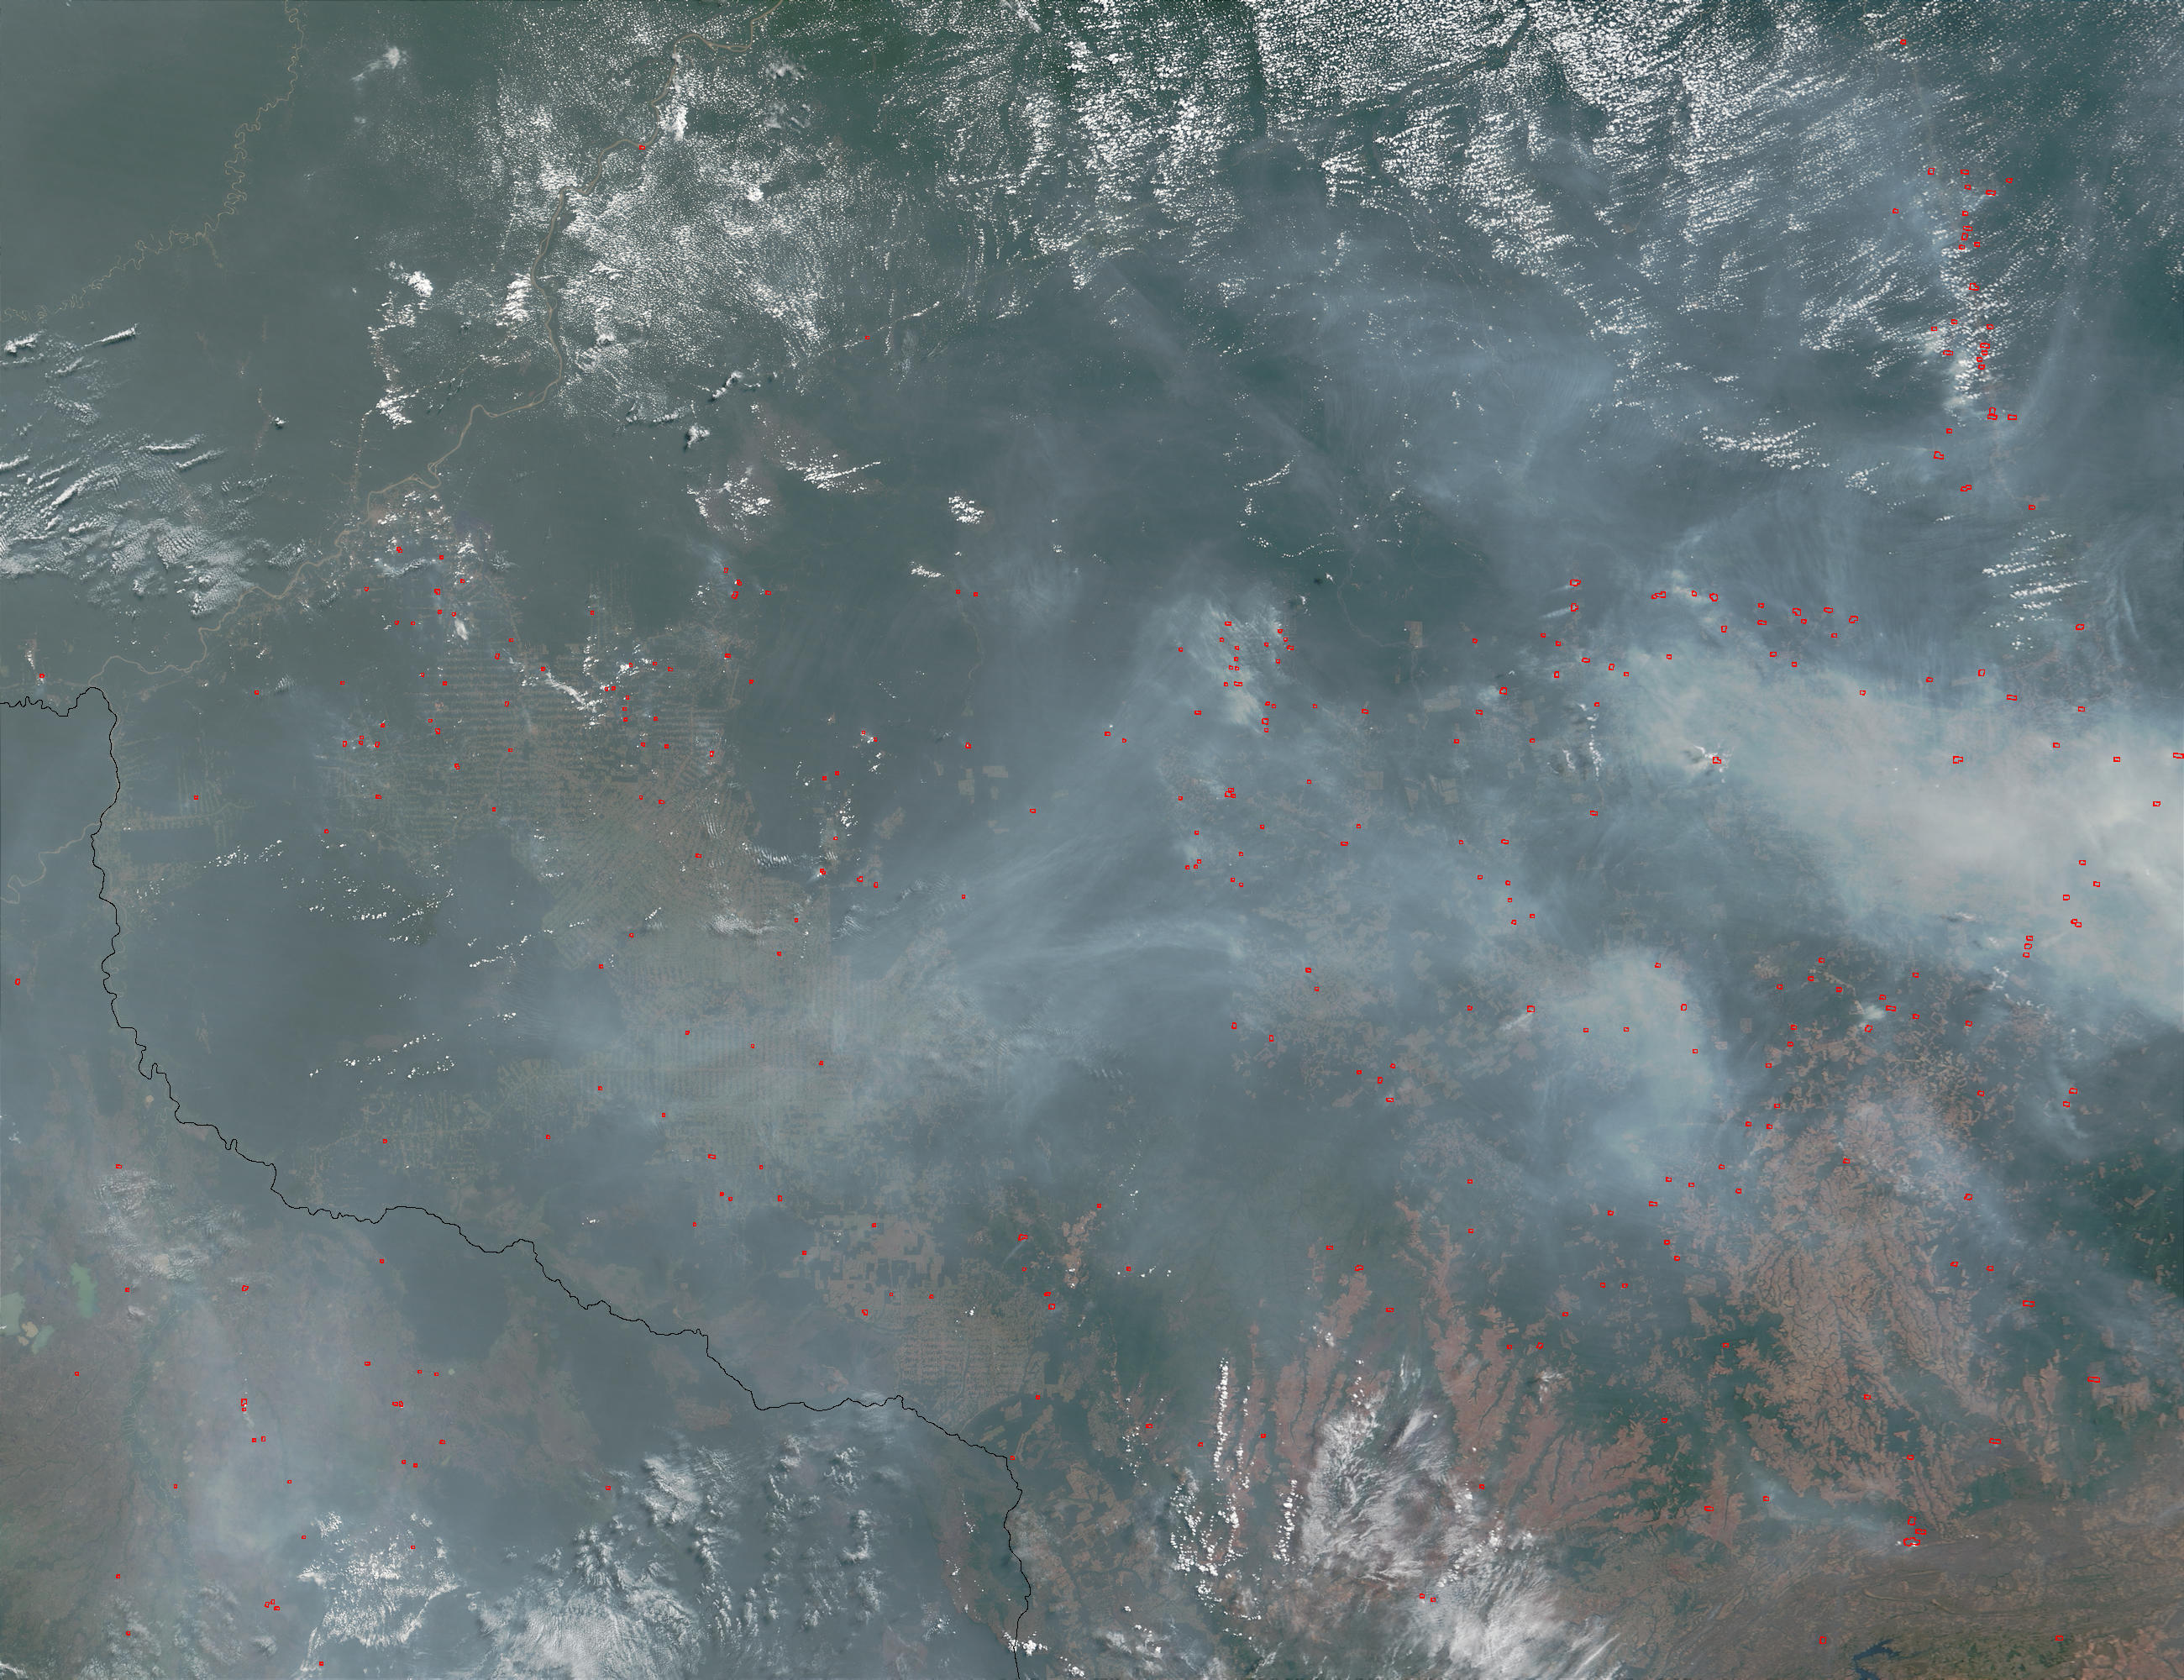 Fires and smoke in Mato Grosso and Rondonia, Brazil - related image preview